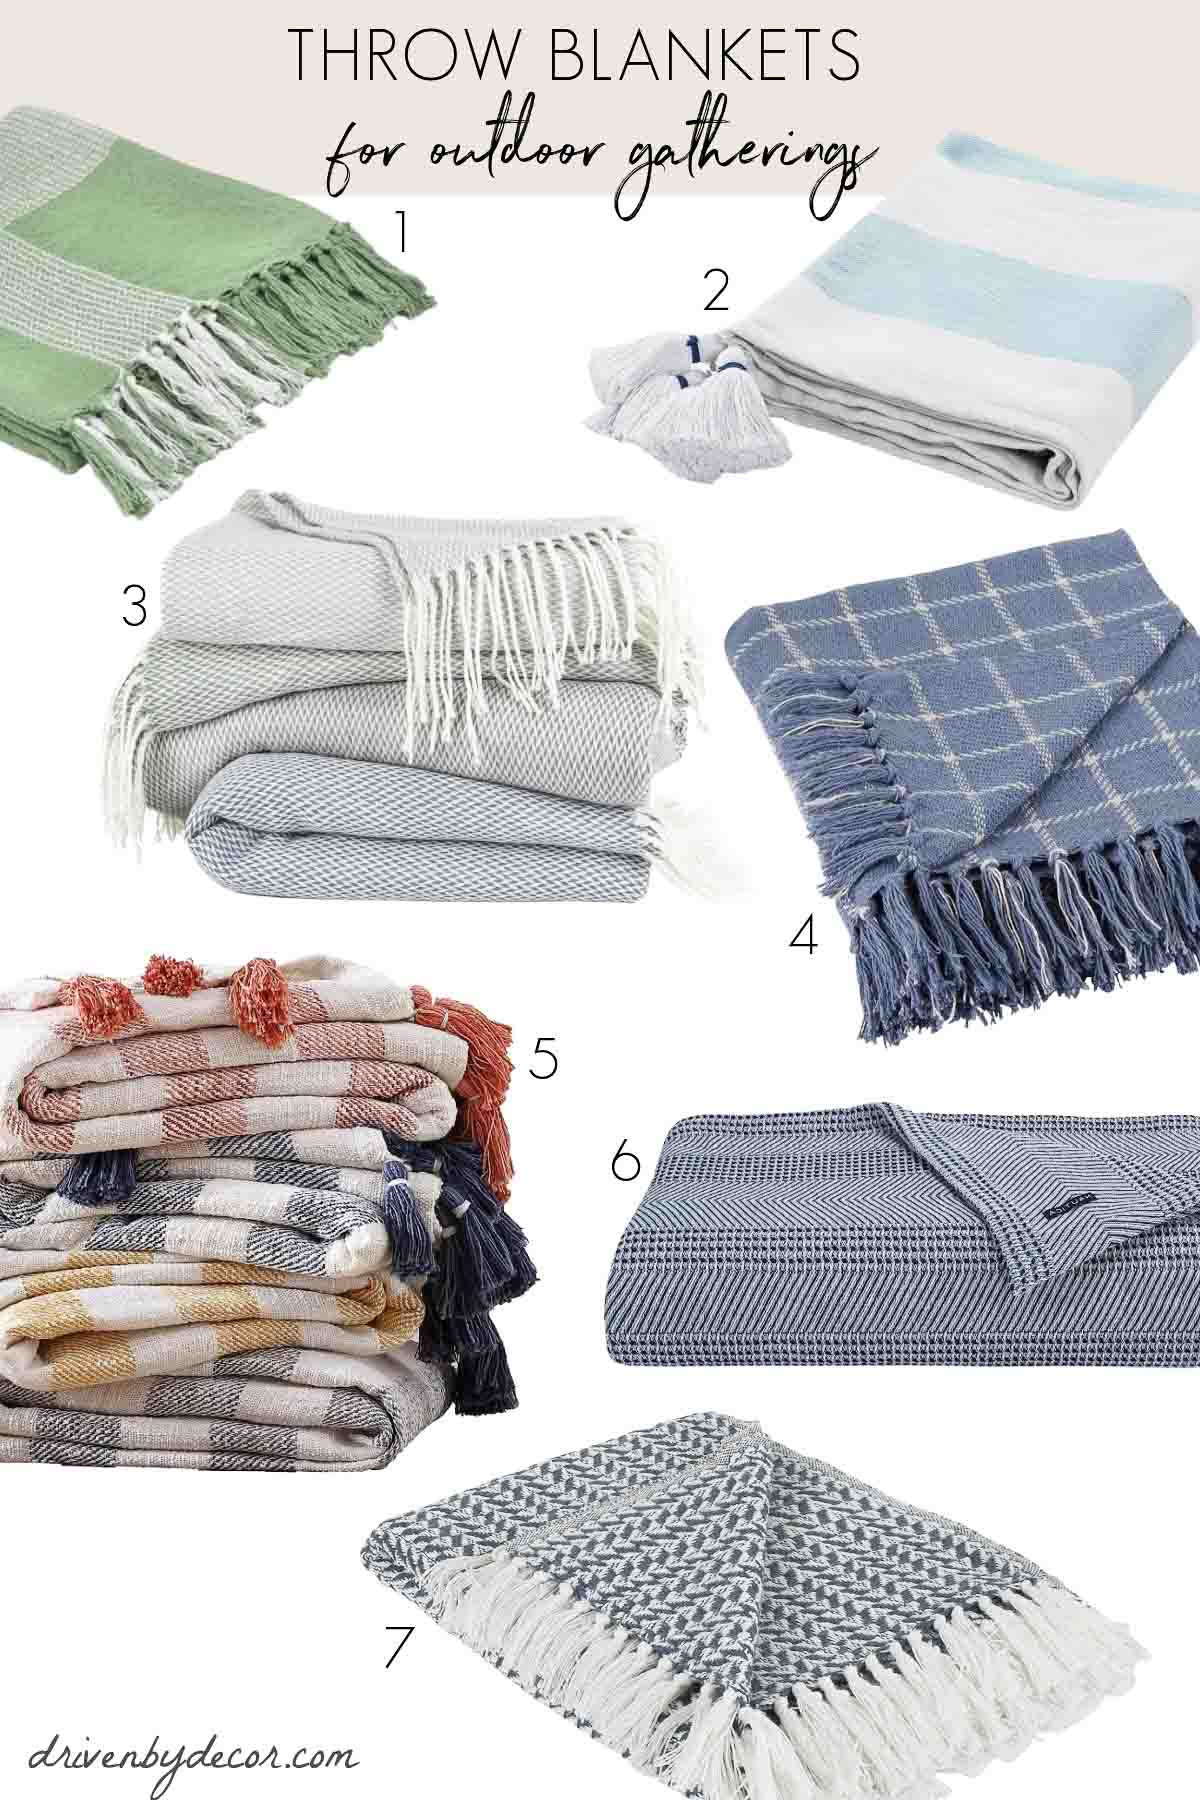 Throw blankets for outdoor entertaining at night